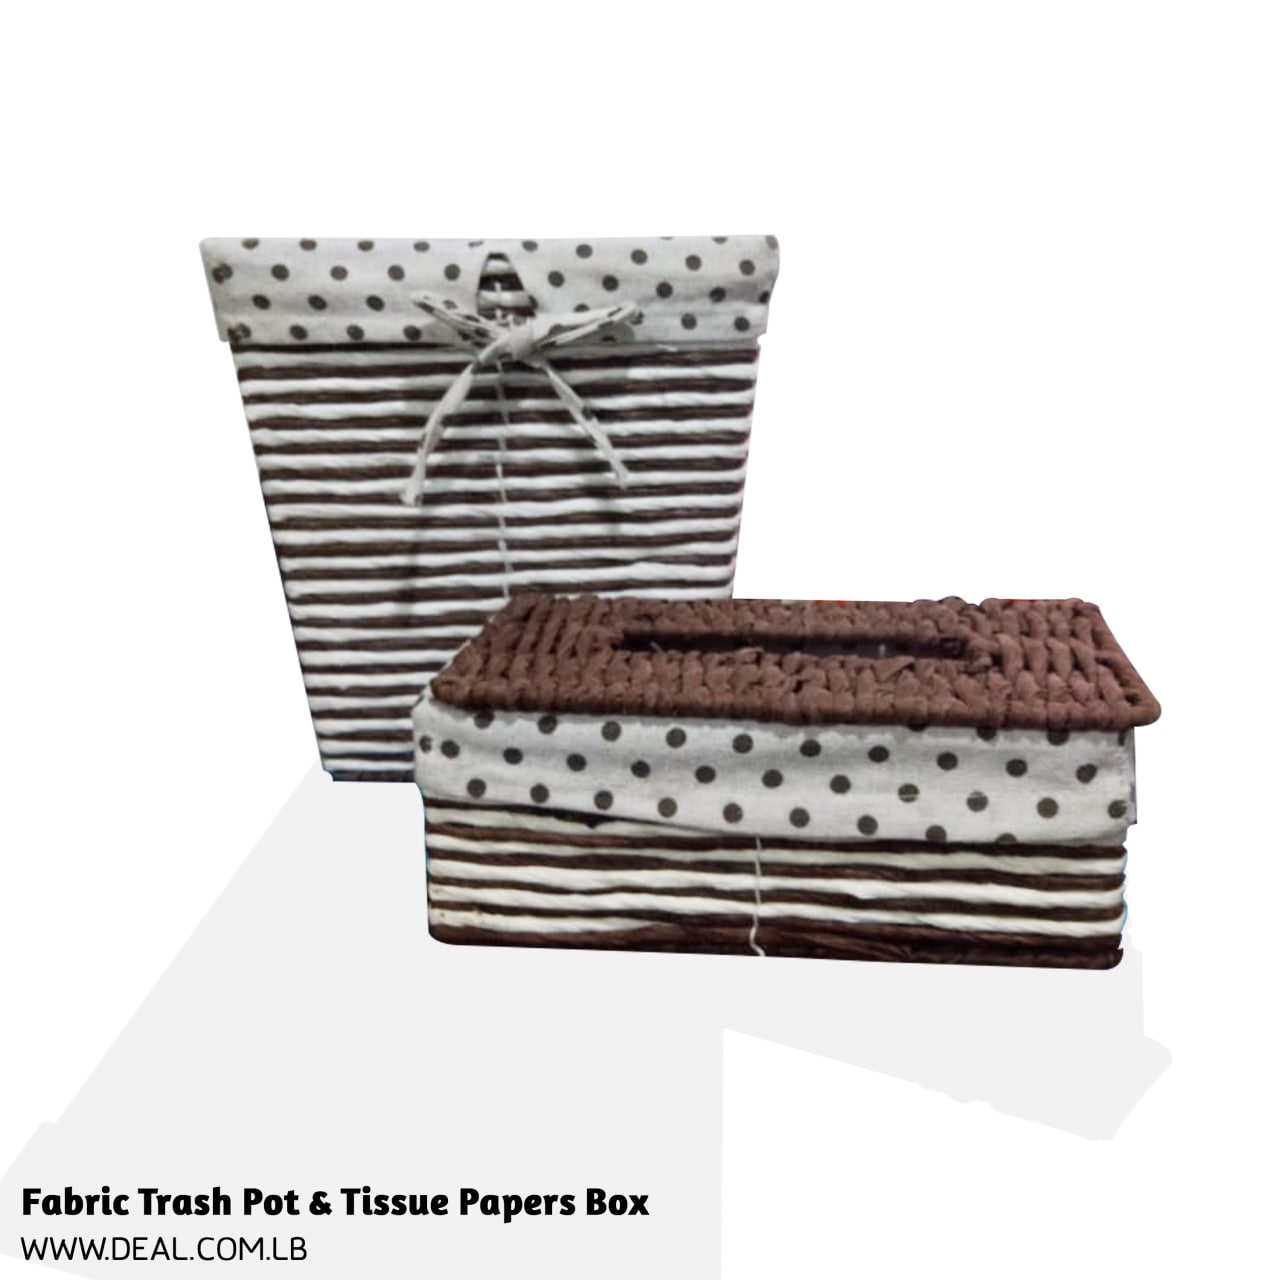 Fabric Trash Pot & Tissue Papers Box